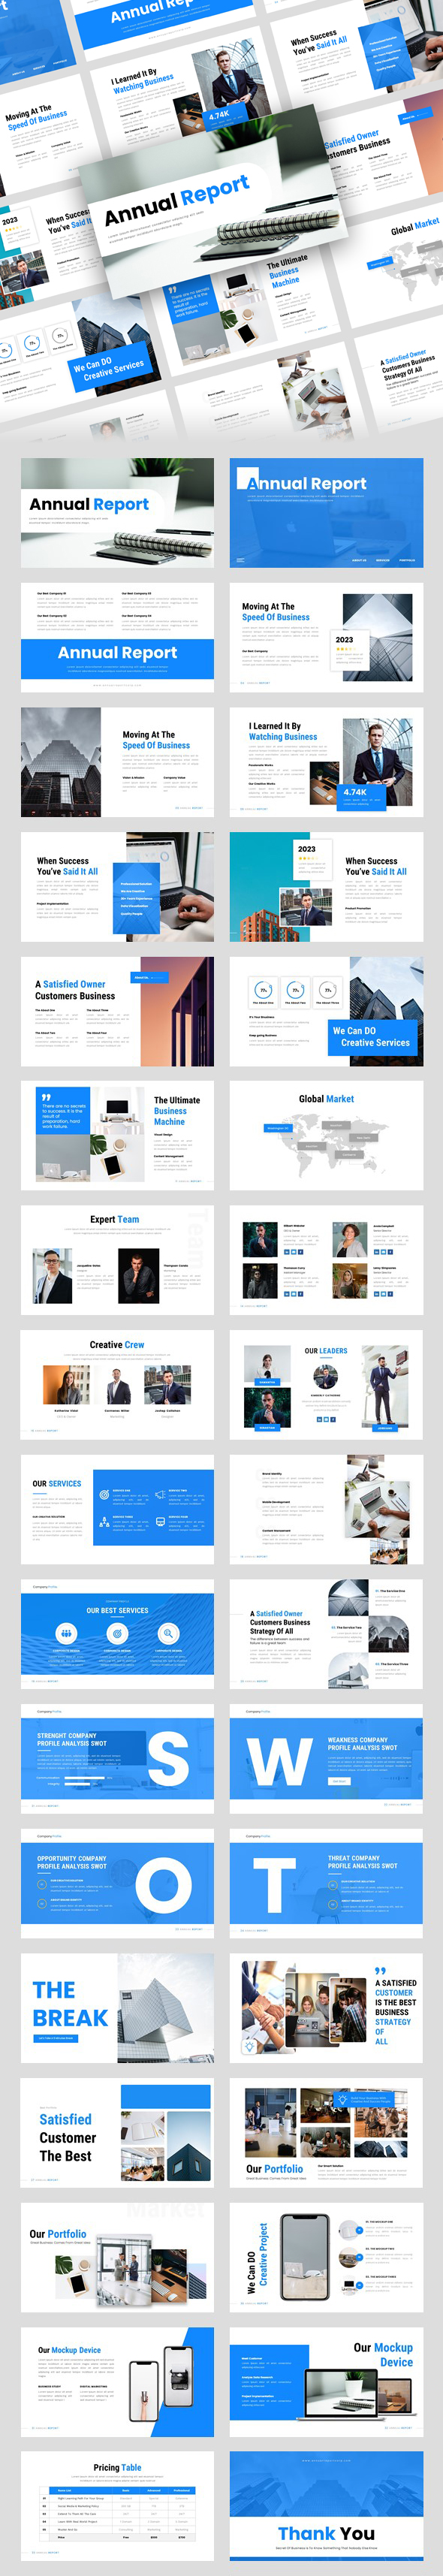 Annual Report Google Slides Template